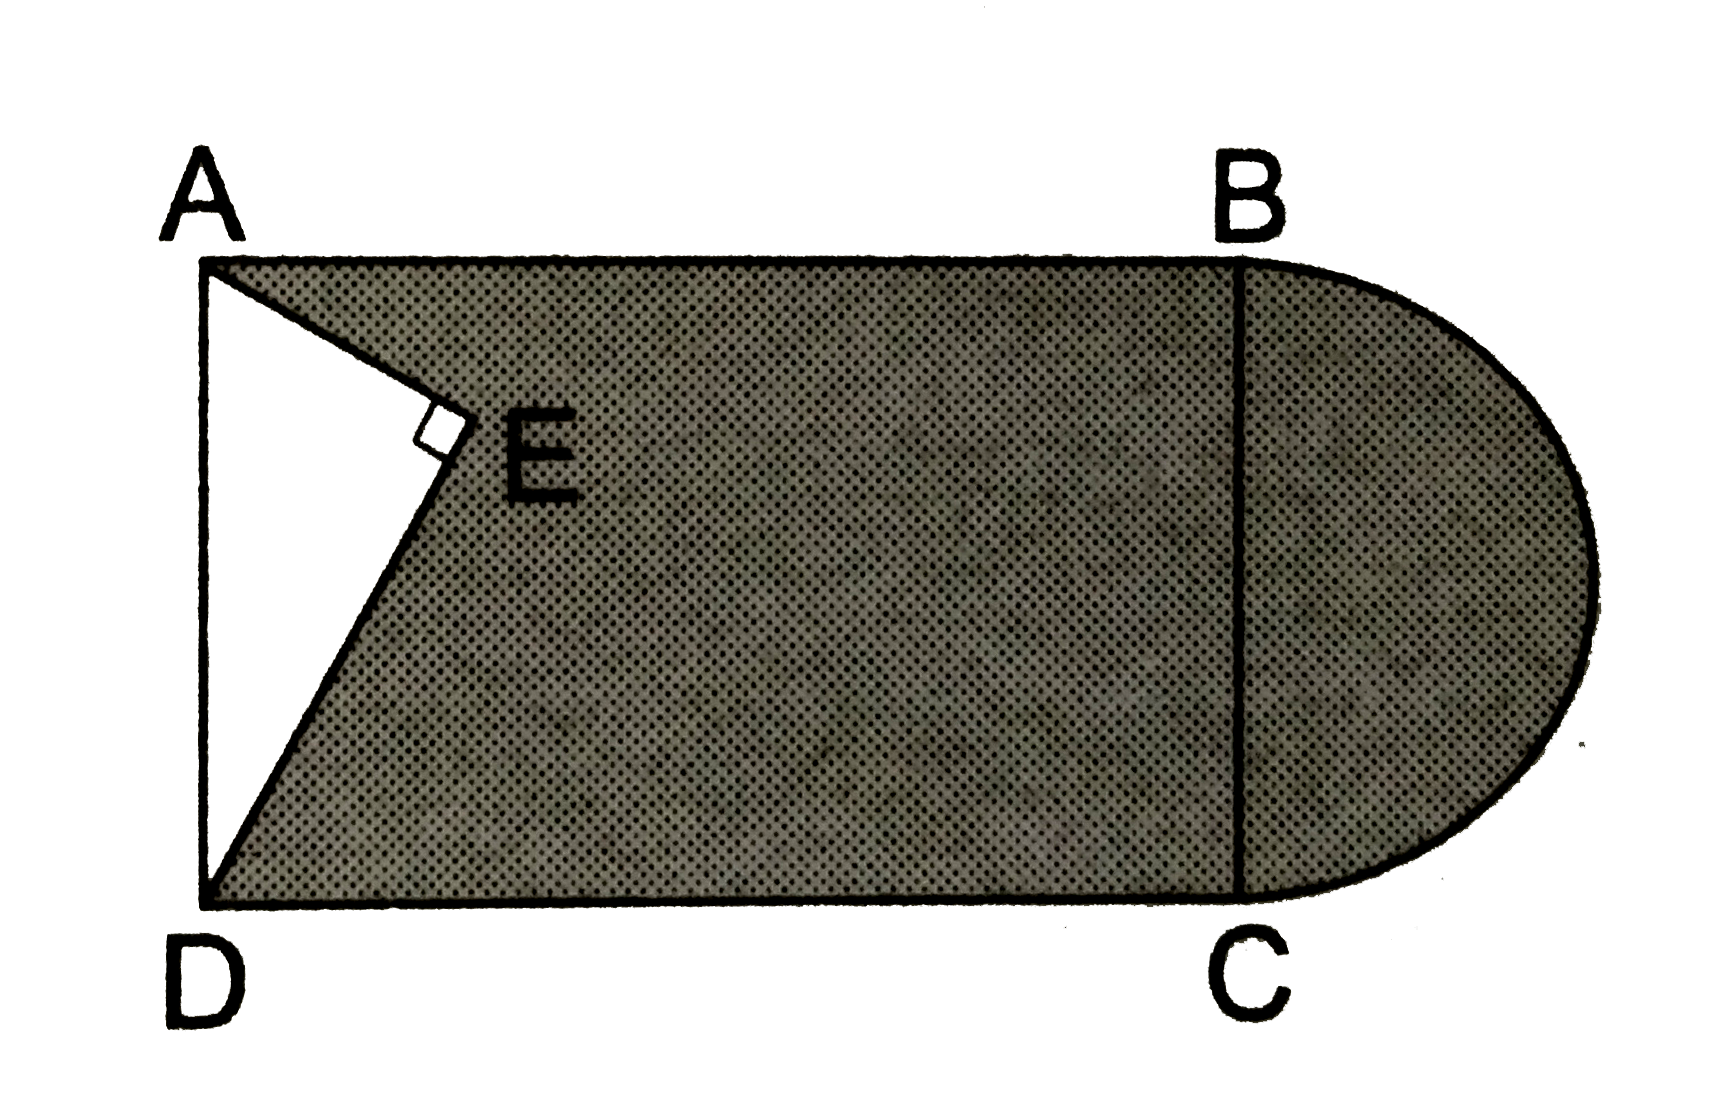 In the given figure, from a rectangular region ABCD with AB=20cm a right triangle AED with AE=9cm and DE=12cm, is cut off. On the other end, taking BC as diameter, a semicircle is added on outside the region. The area of the shaded region.   [Use pi=3.14]